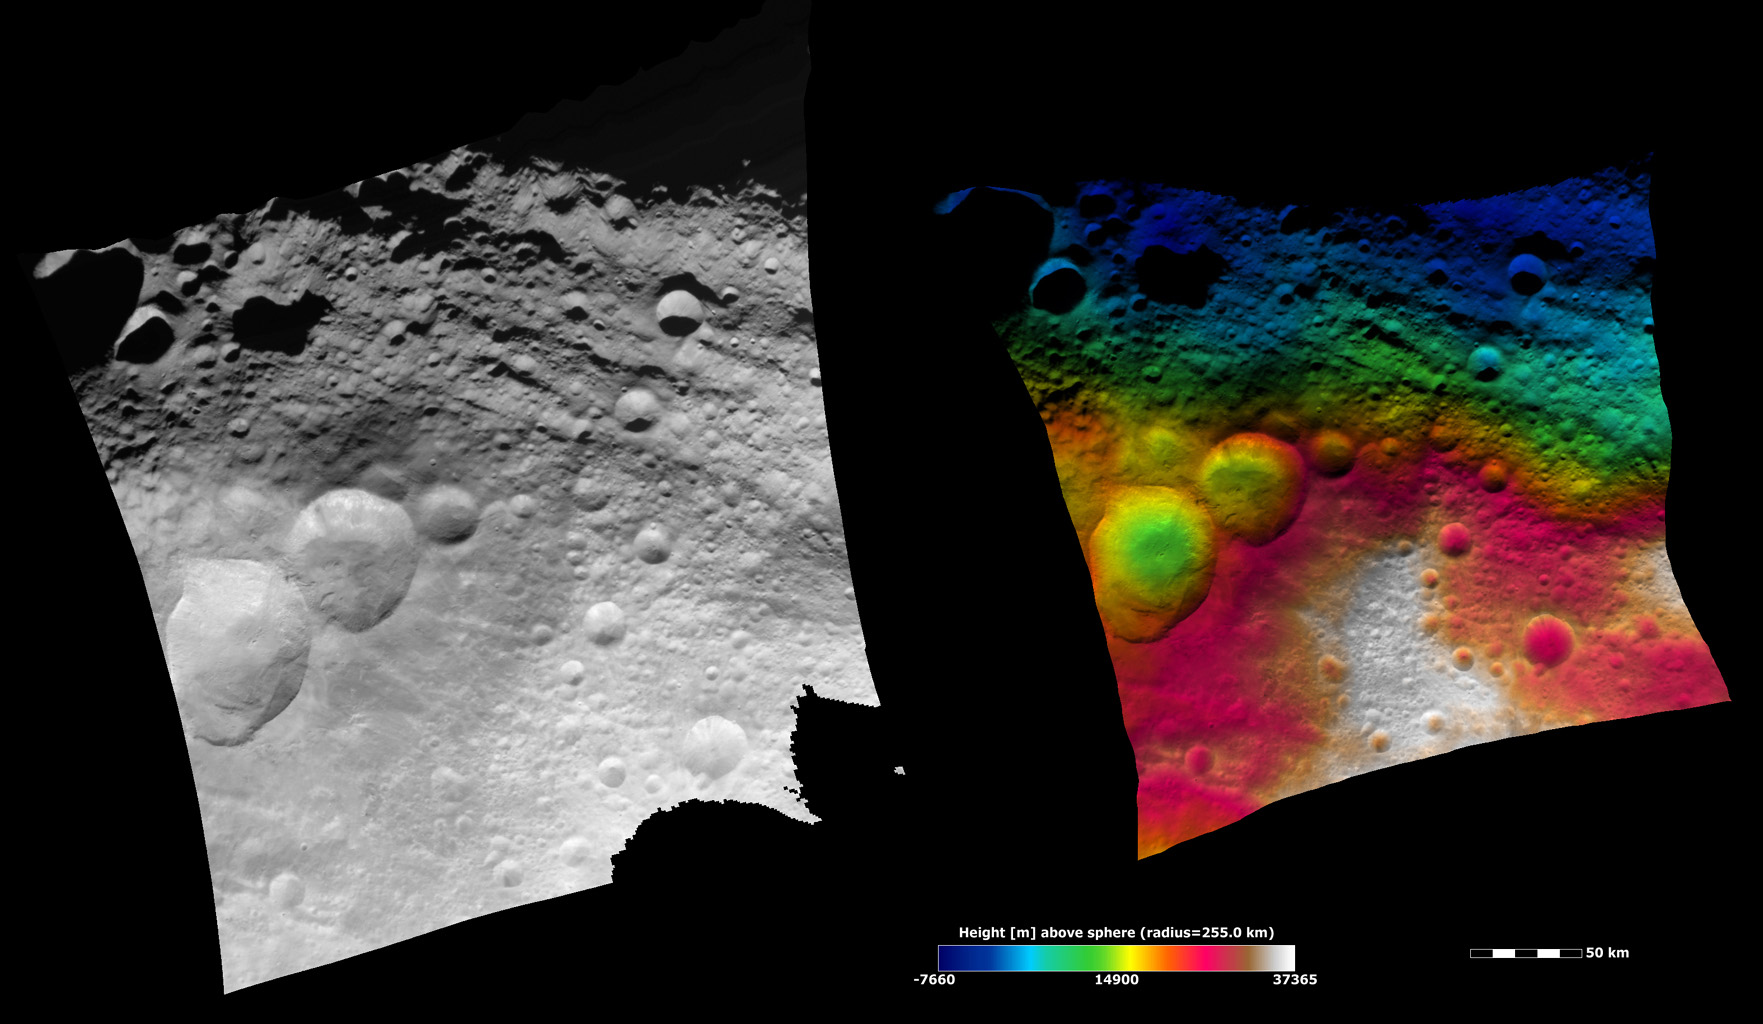 Topography of the 'Snowman Craters' and Surrounding Area